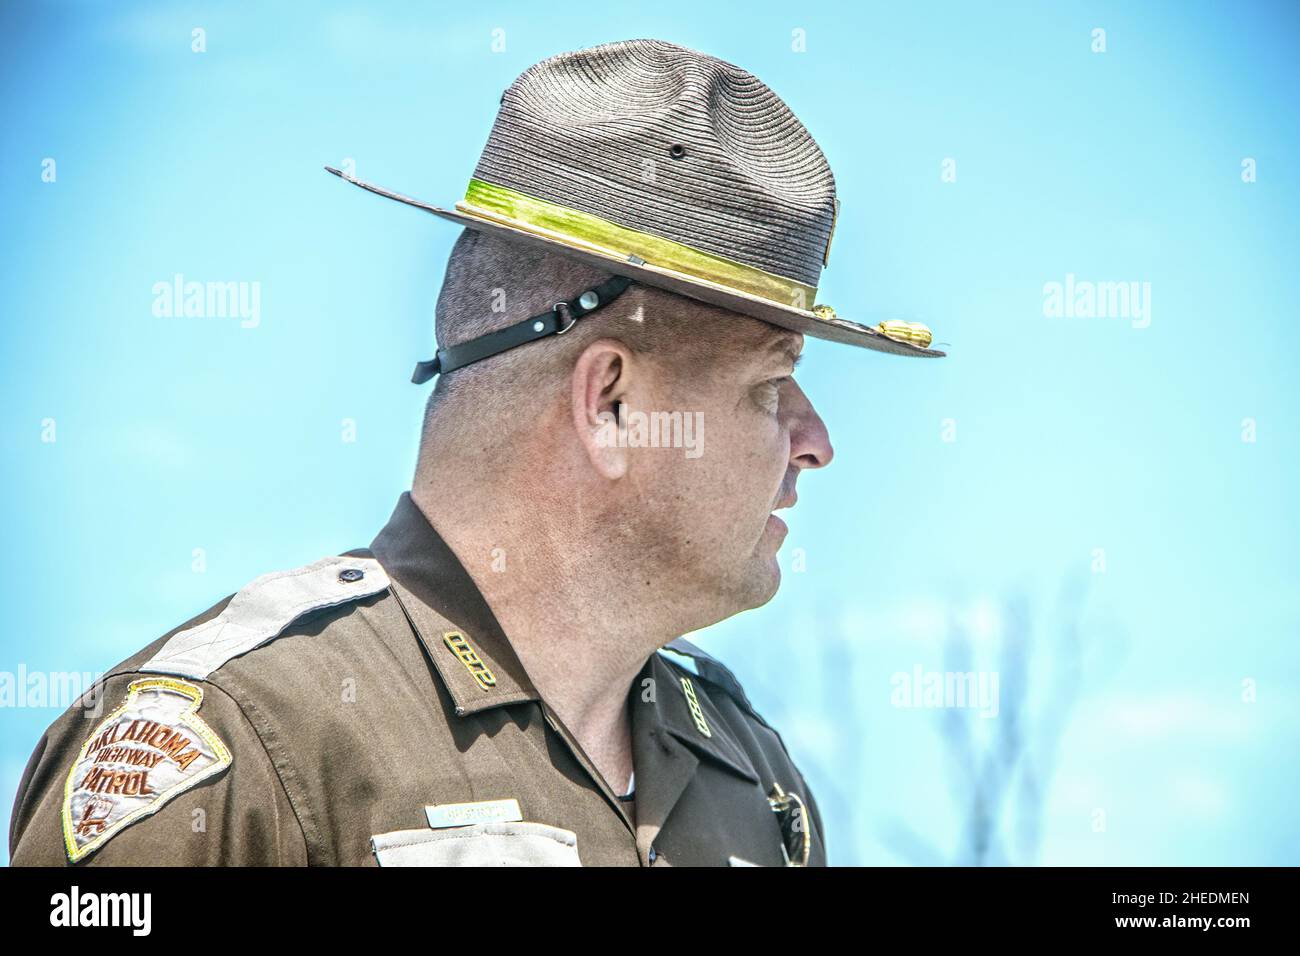 5-14-2020 Cushing USA - Oklahoma highway patrolman in uniform and hat against blue sky  head and shoulders profile closeup Stock Photo